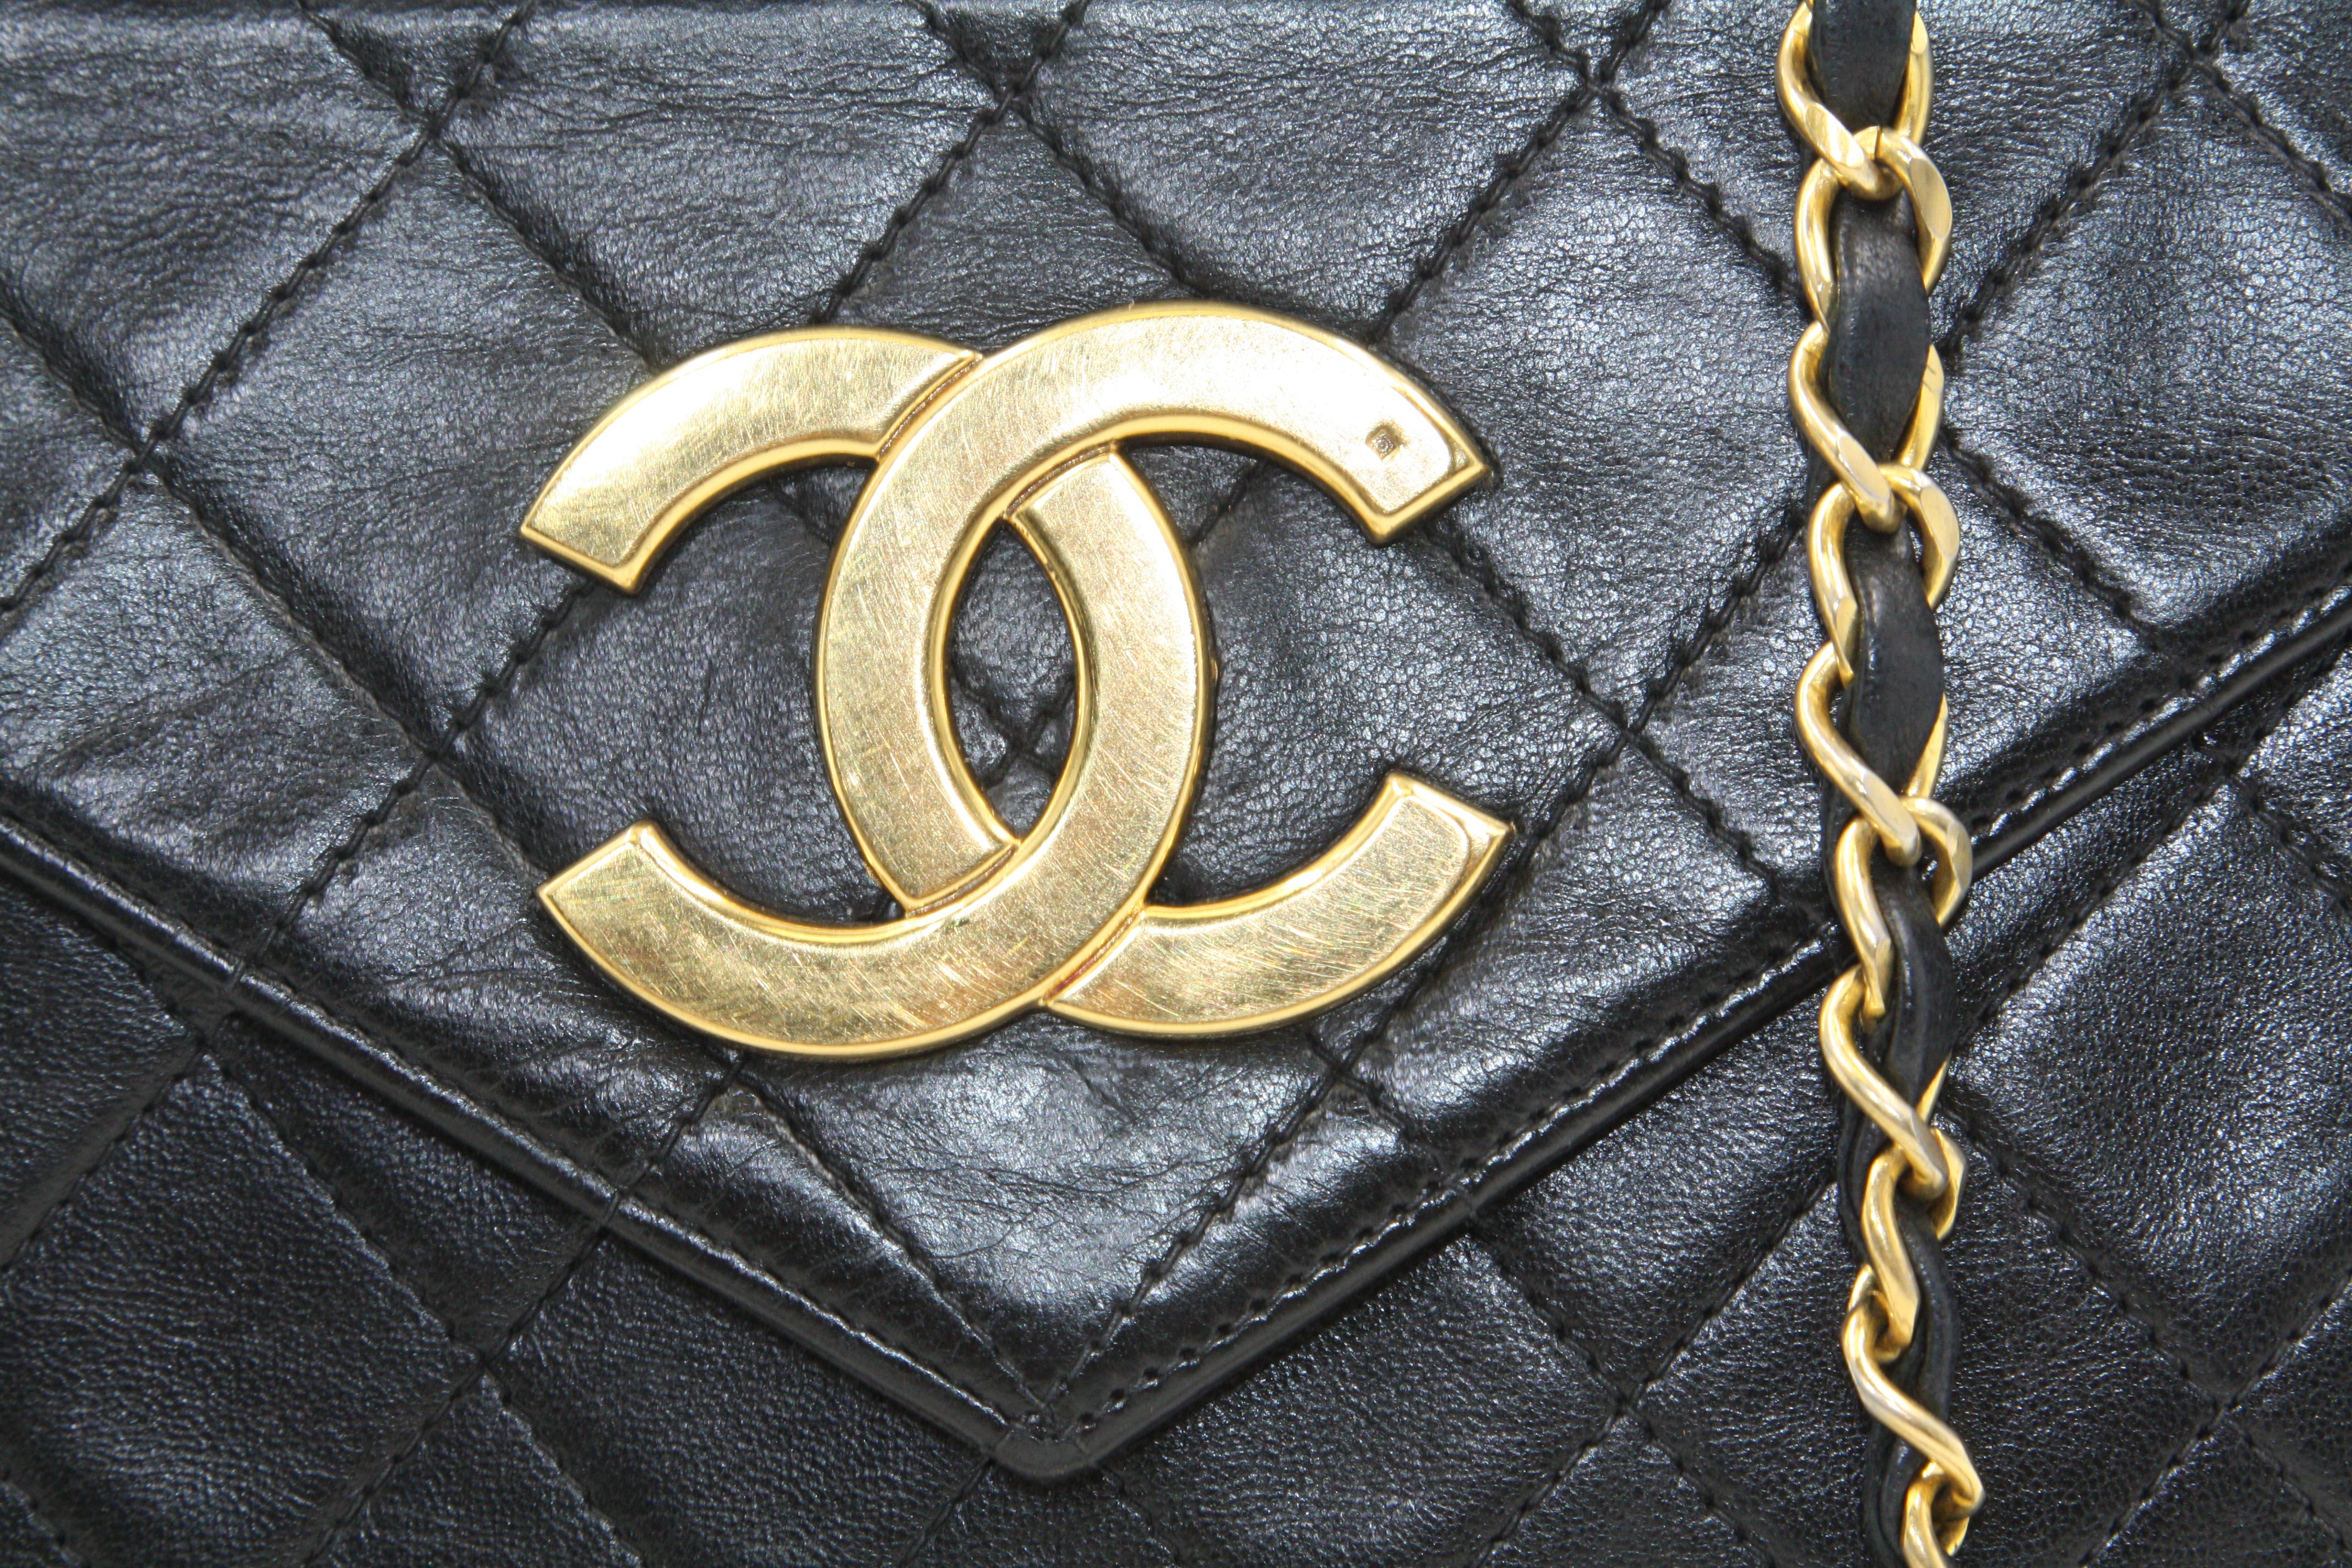 We guarantee this is an authentic CHANEL Vintage Lambskin Quilted small Single Flap Black Bag. This stylish vintage model is finely composed of supple diamond quilted lambskin leather in black. The bag features a waist-length polished gold chain